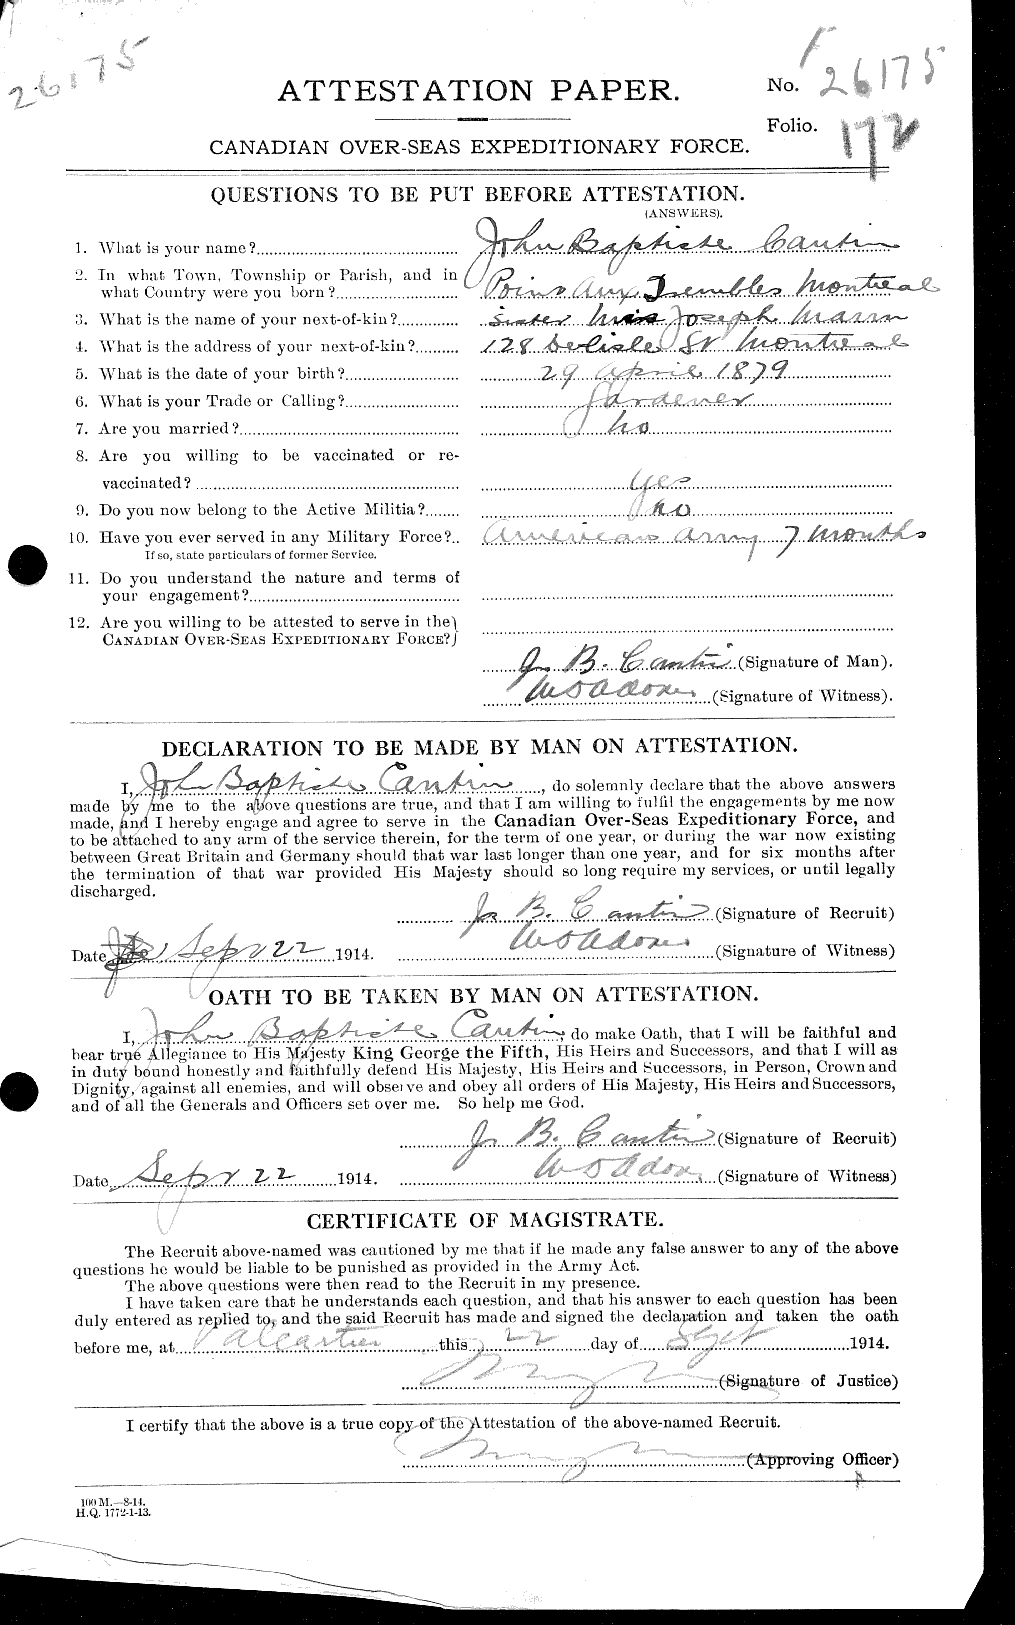 Personnel Records of the First World War - CEF 009058a